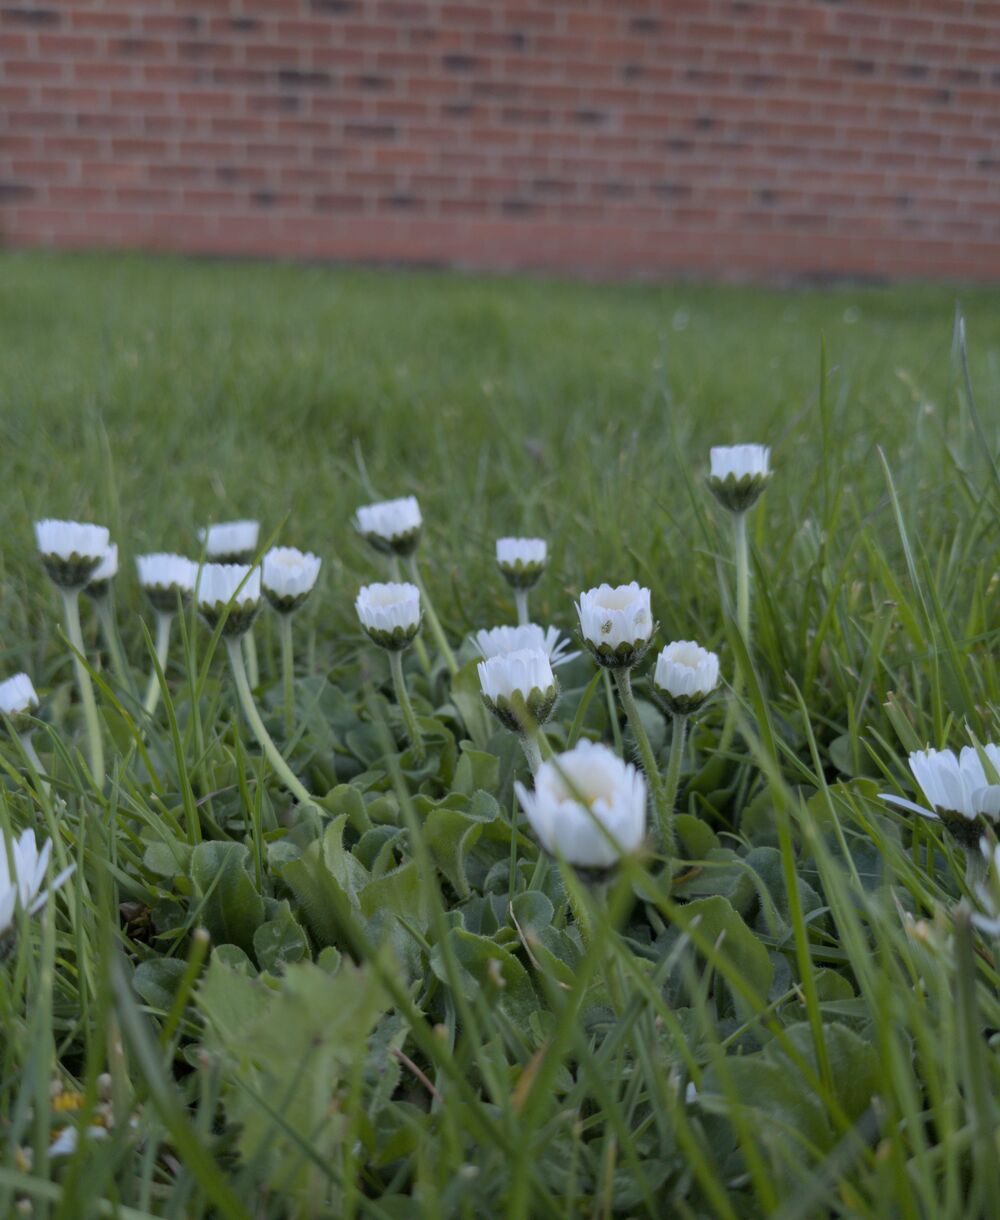 A low down shot of some small white flowers growing in some grass, with a brick wall in the background